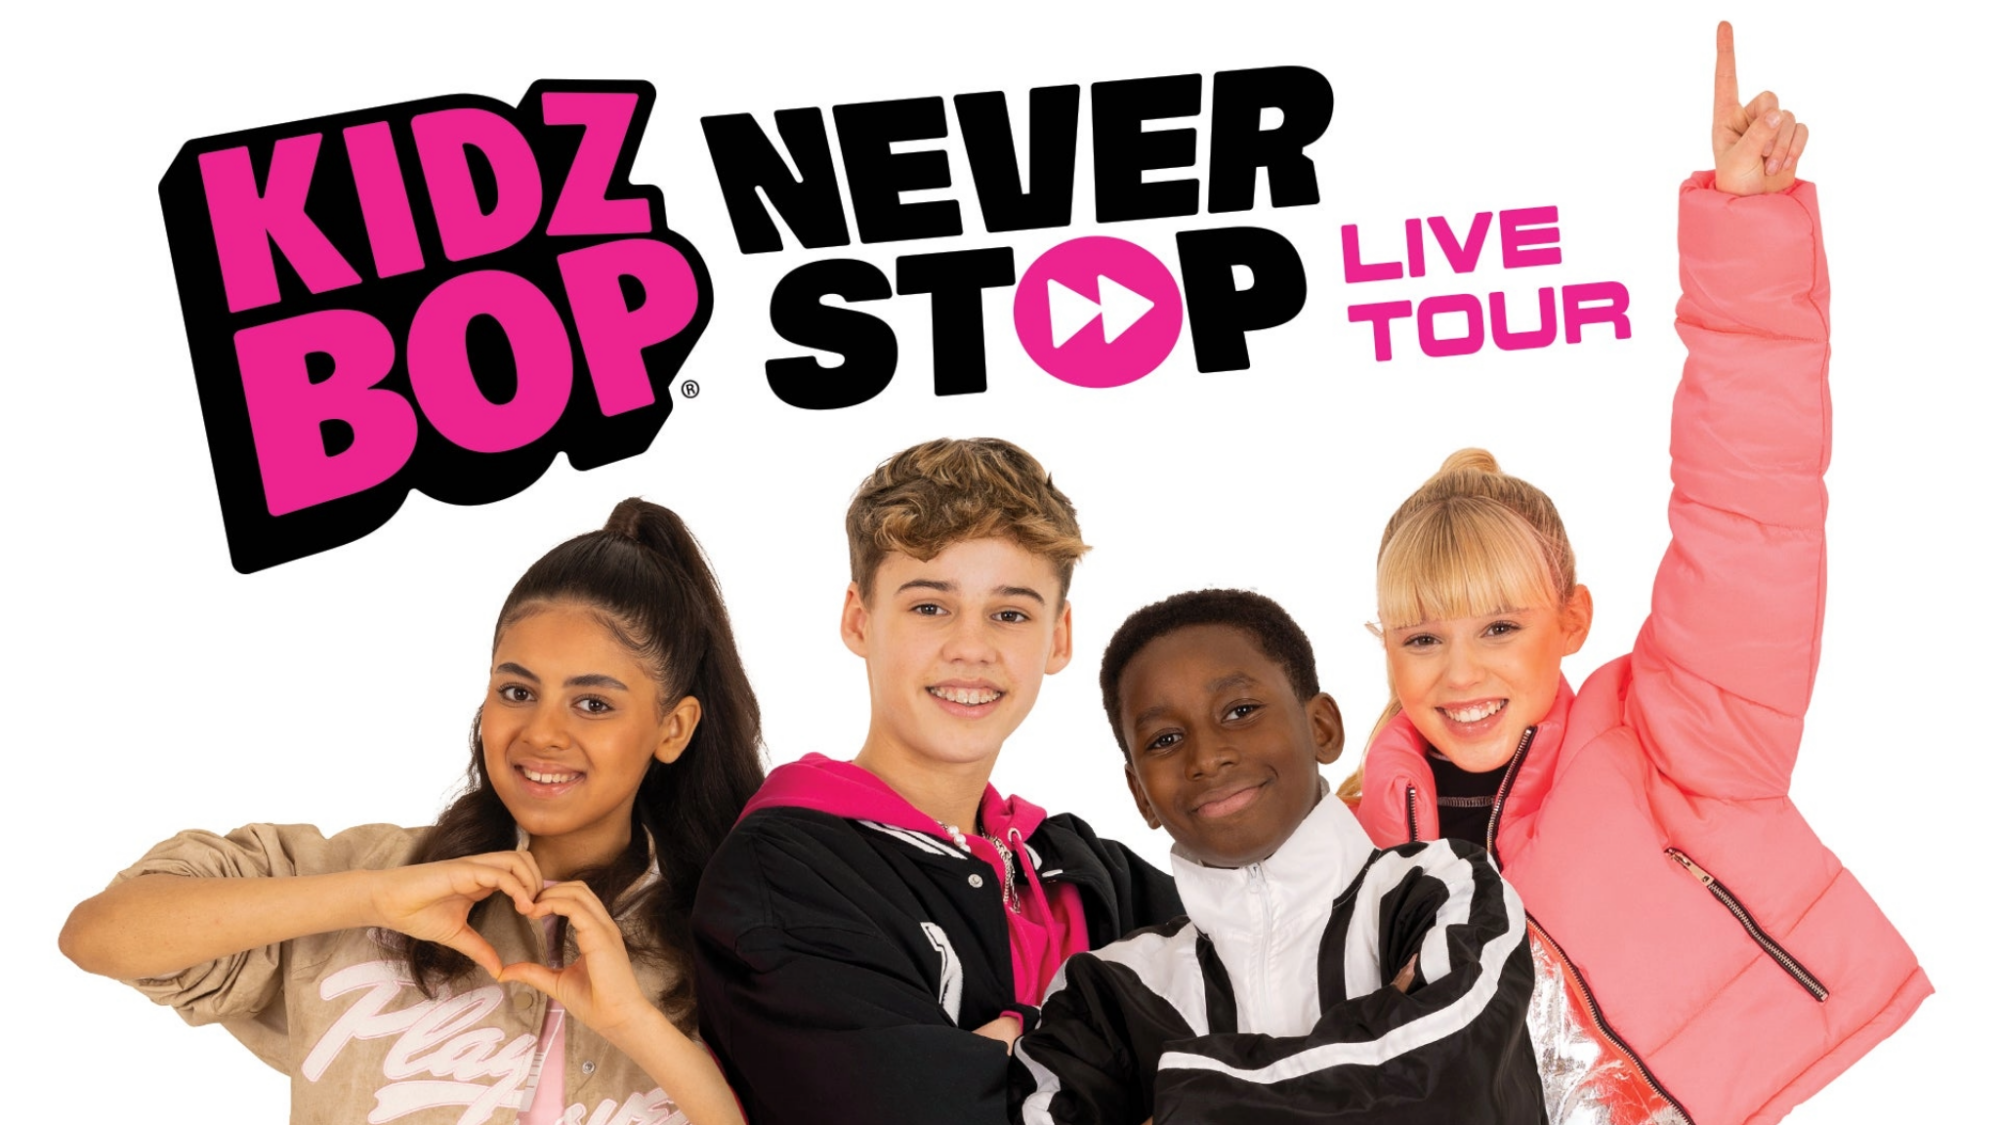 Image name KIDZ BOP Never Stop Live Tour at Sheffield City Hall Oval Hall Sheffield the 33 image from the post KIDZ BOP NEVER STOP TOUR at York Barbican, York in Yorkshire.com.